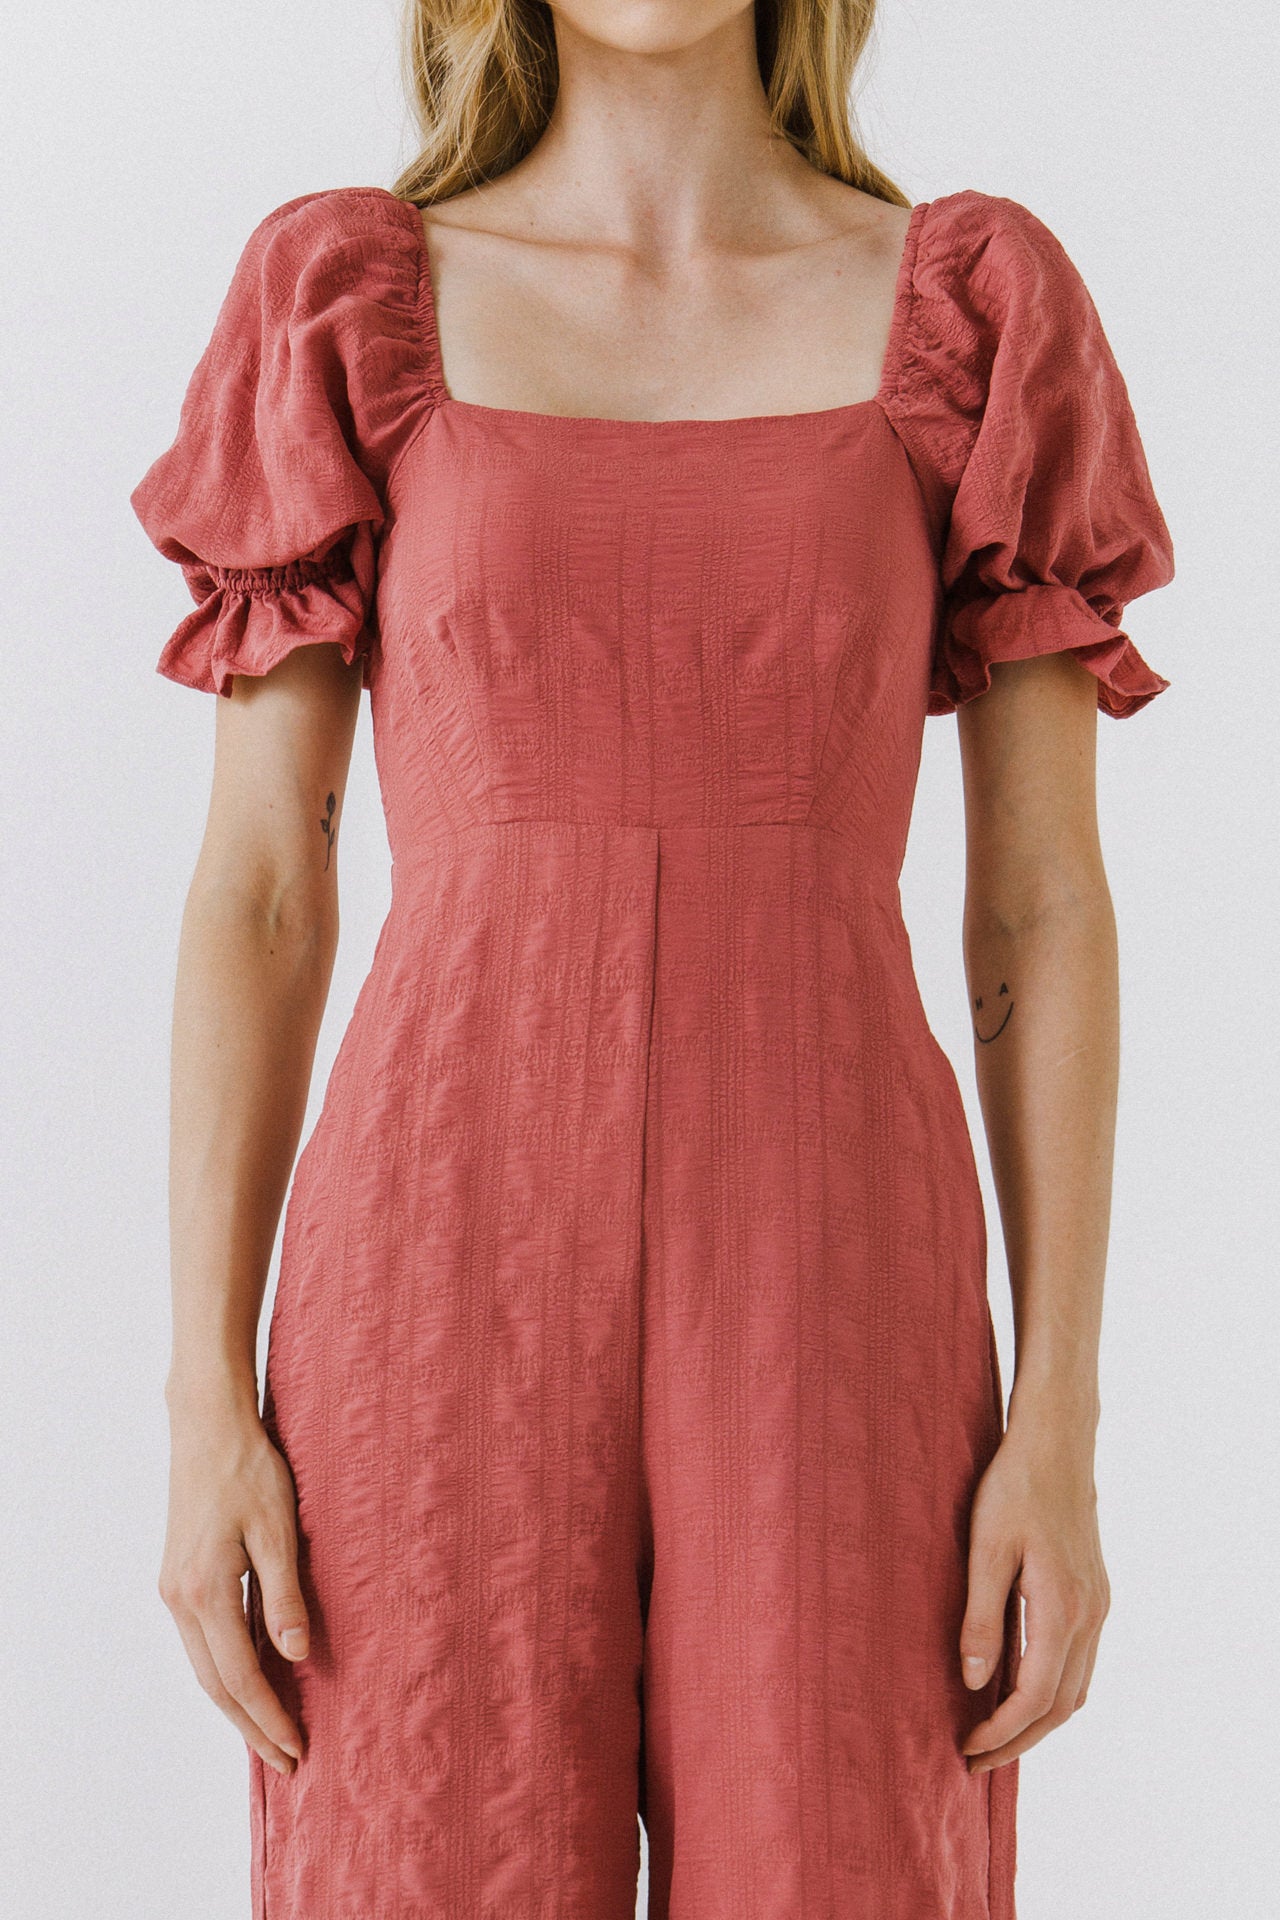 FREE THE ROSES - Textured Square Neck Jumpsuit - JUMPSUITS available at Objectrare